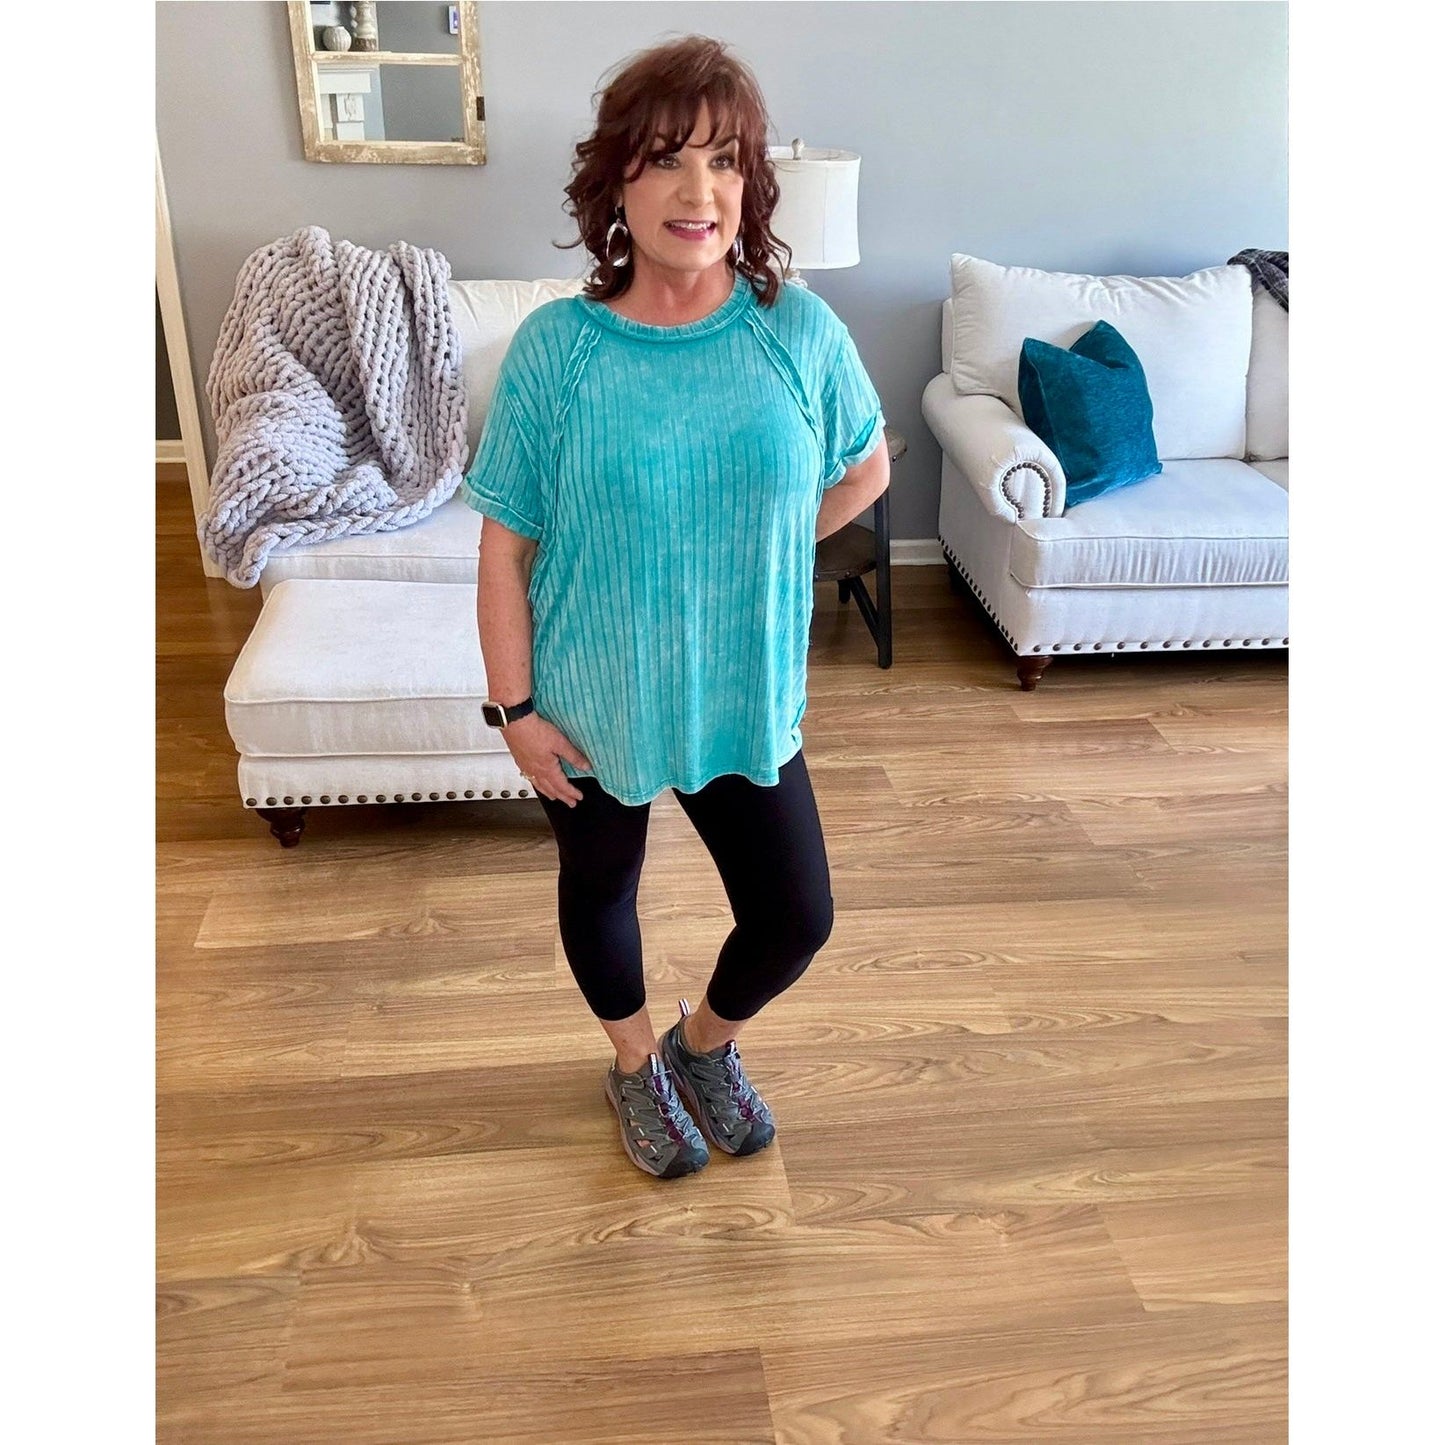 The Ava Teal Top